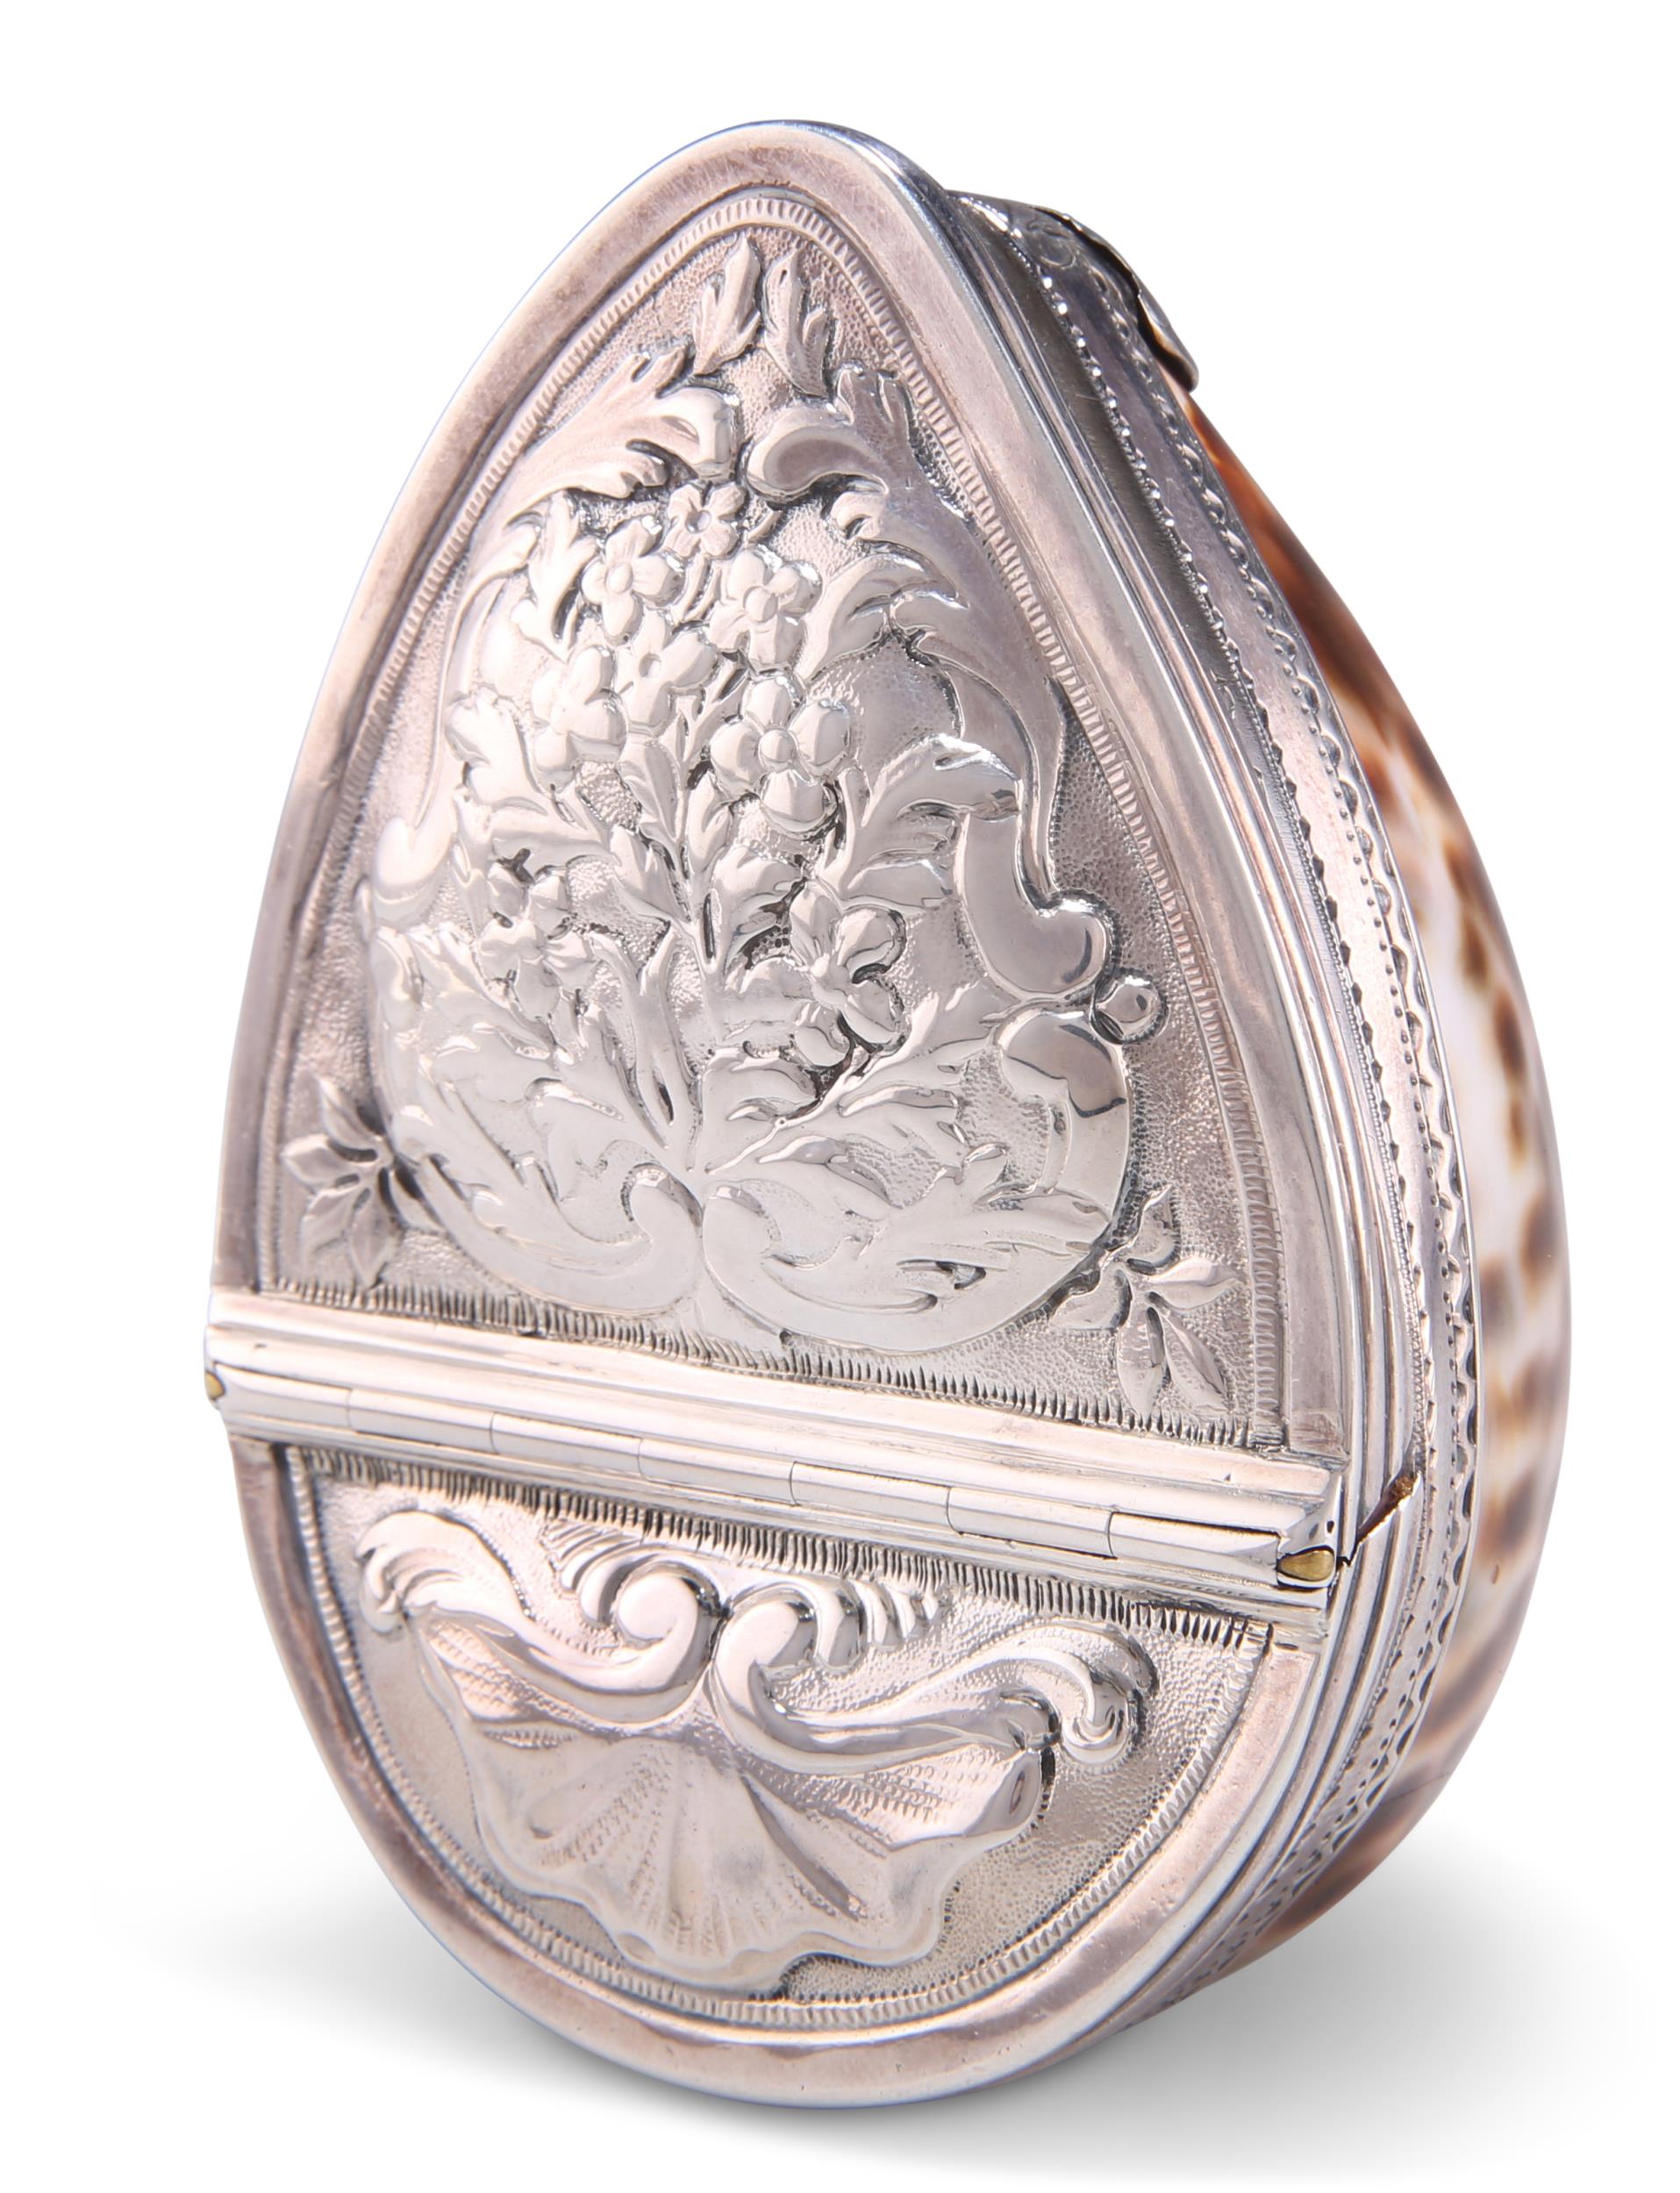 A LATE 18TH CENTURY FRENCH SILVER-MOUNTED COWRIE SHELL SNUFF BOX